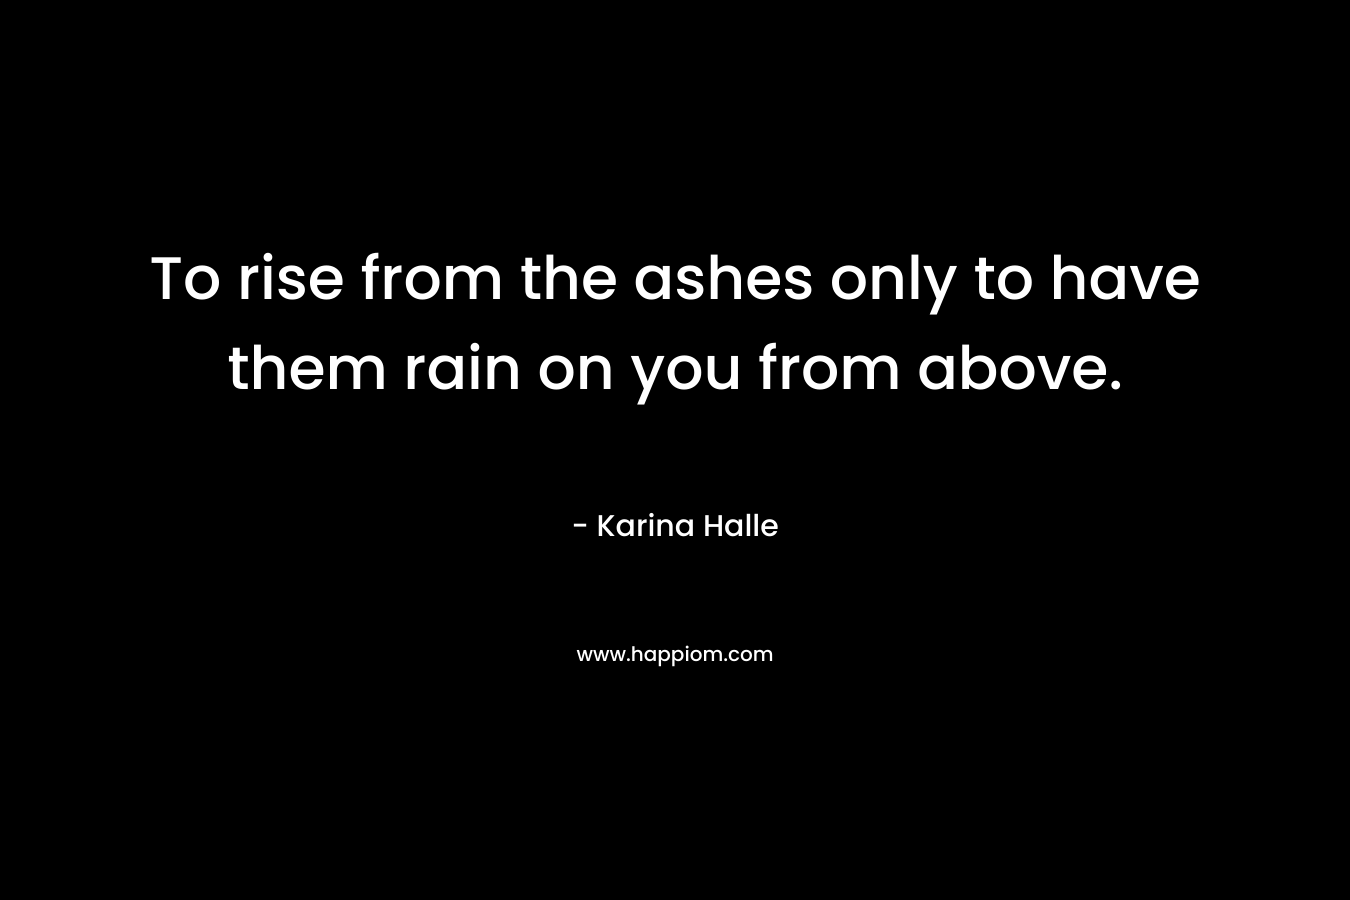 To rise from the ashes only to have them rain on you from above.